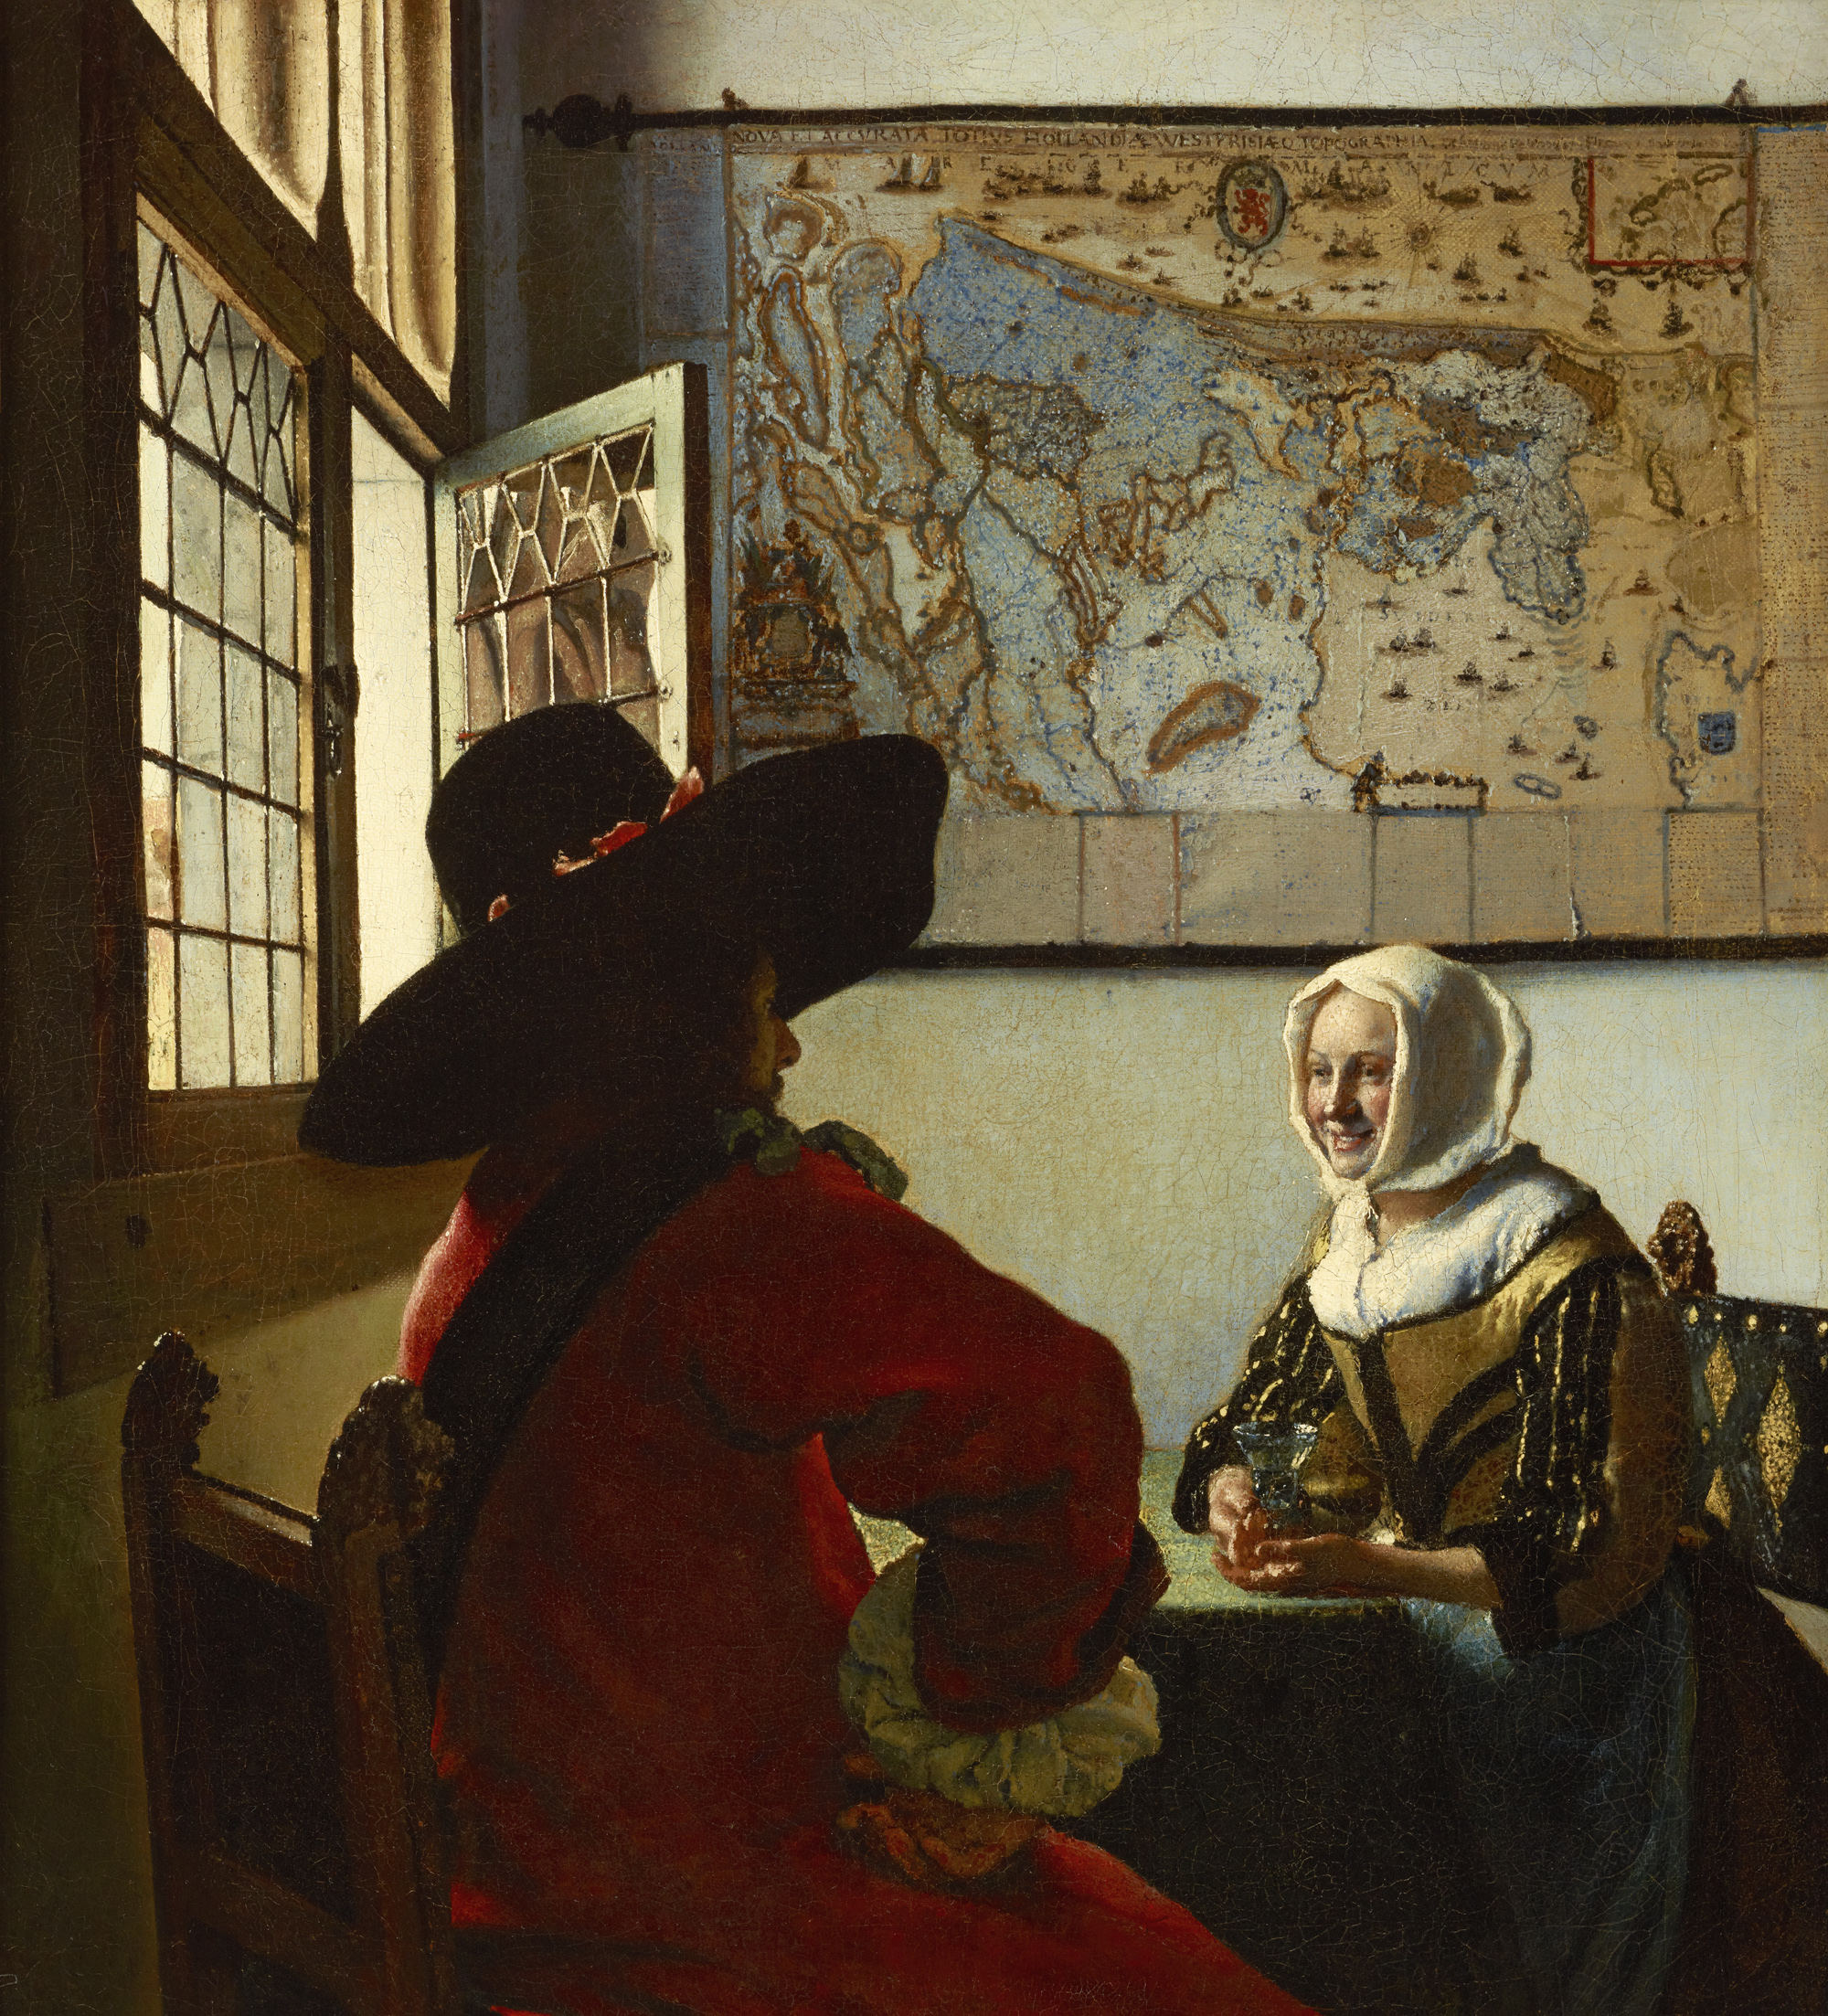 Officer and Laughing Girl by Johannes Vermeer - ca. 1657 - 19 7/8 x 18 1/8 inches The Frick Collection